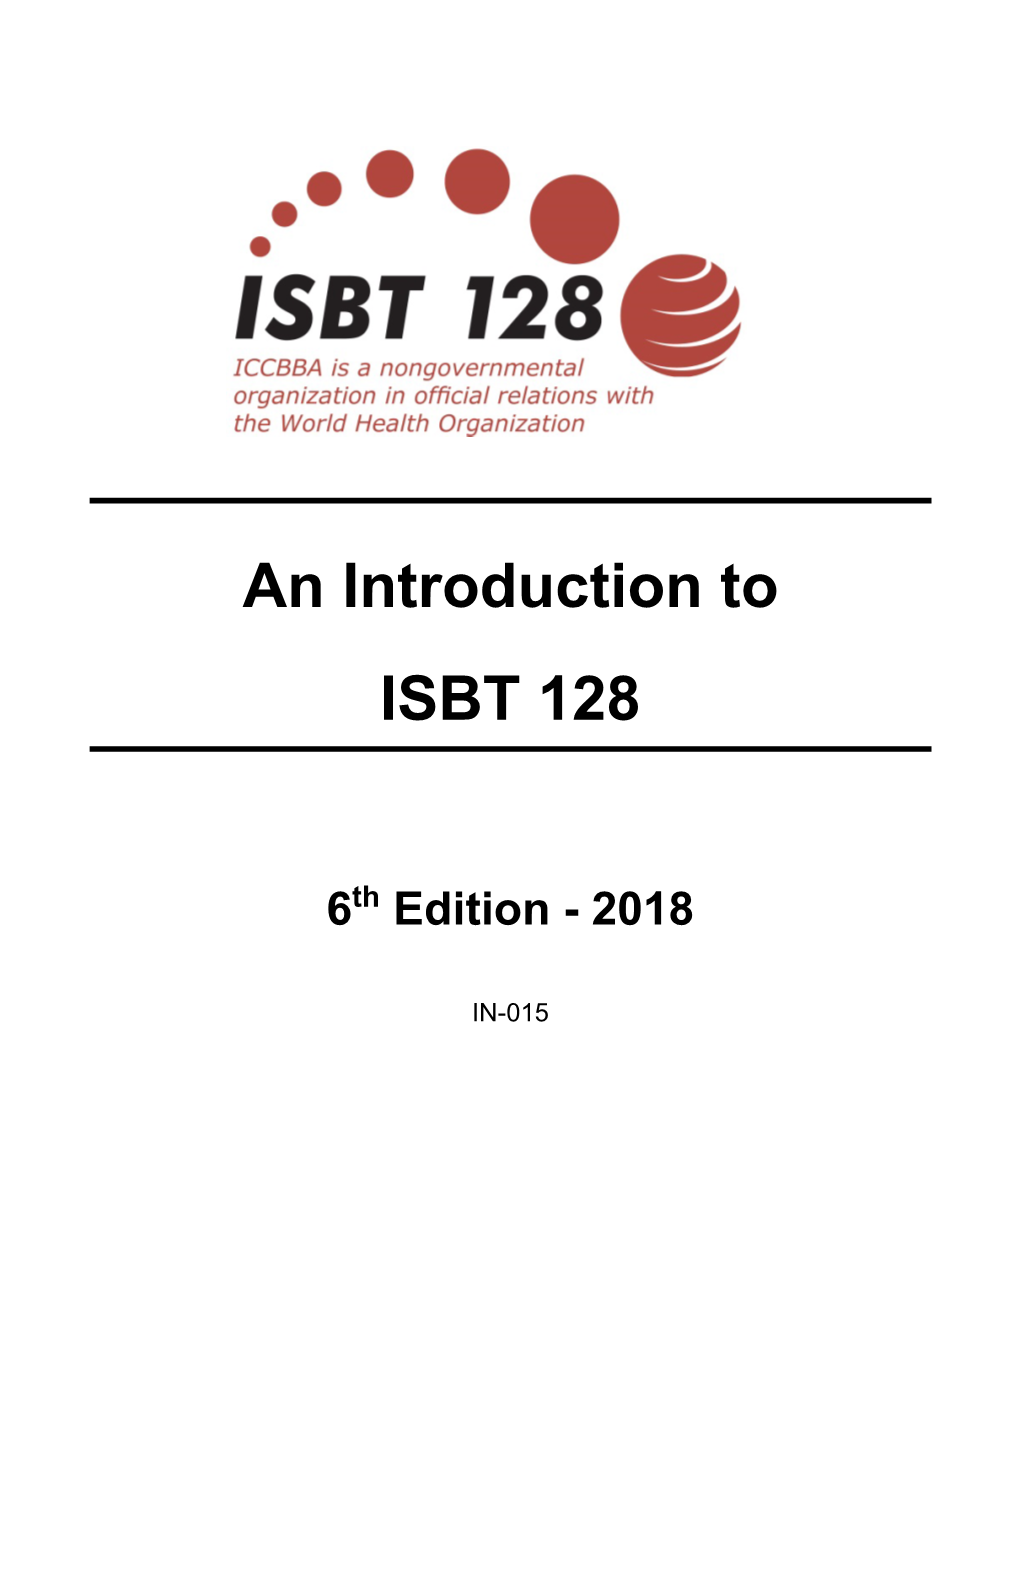 An Introduction to ISBT 128